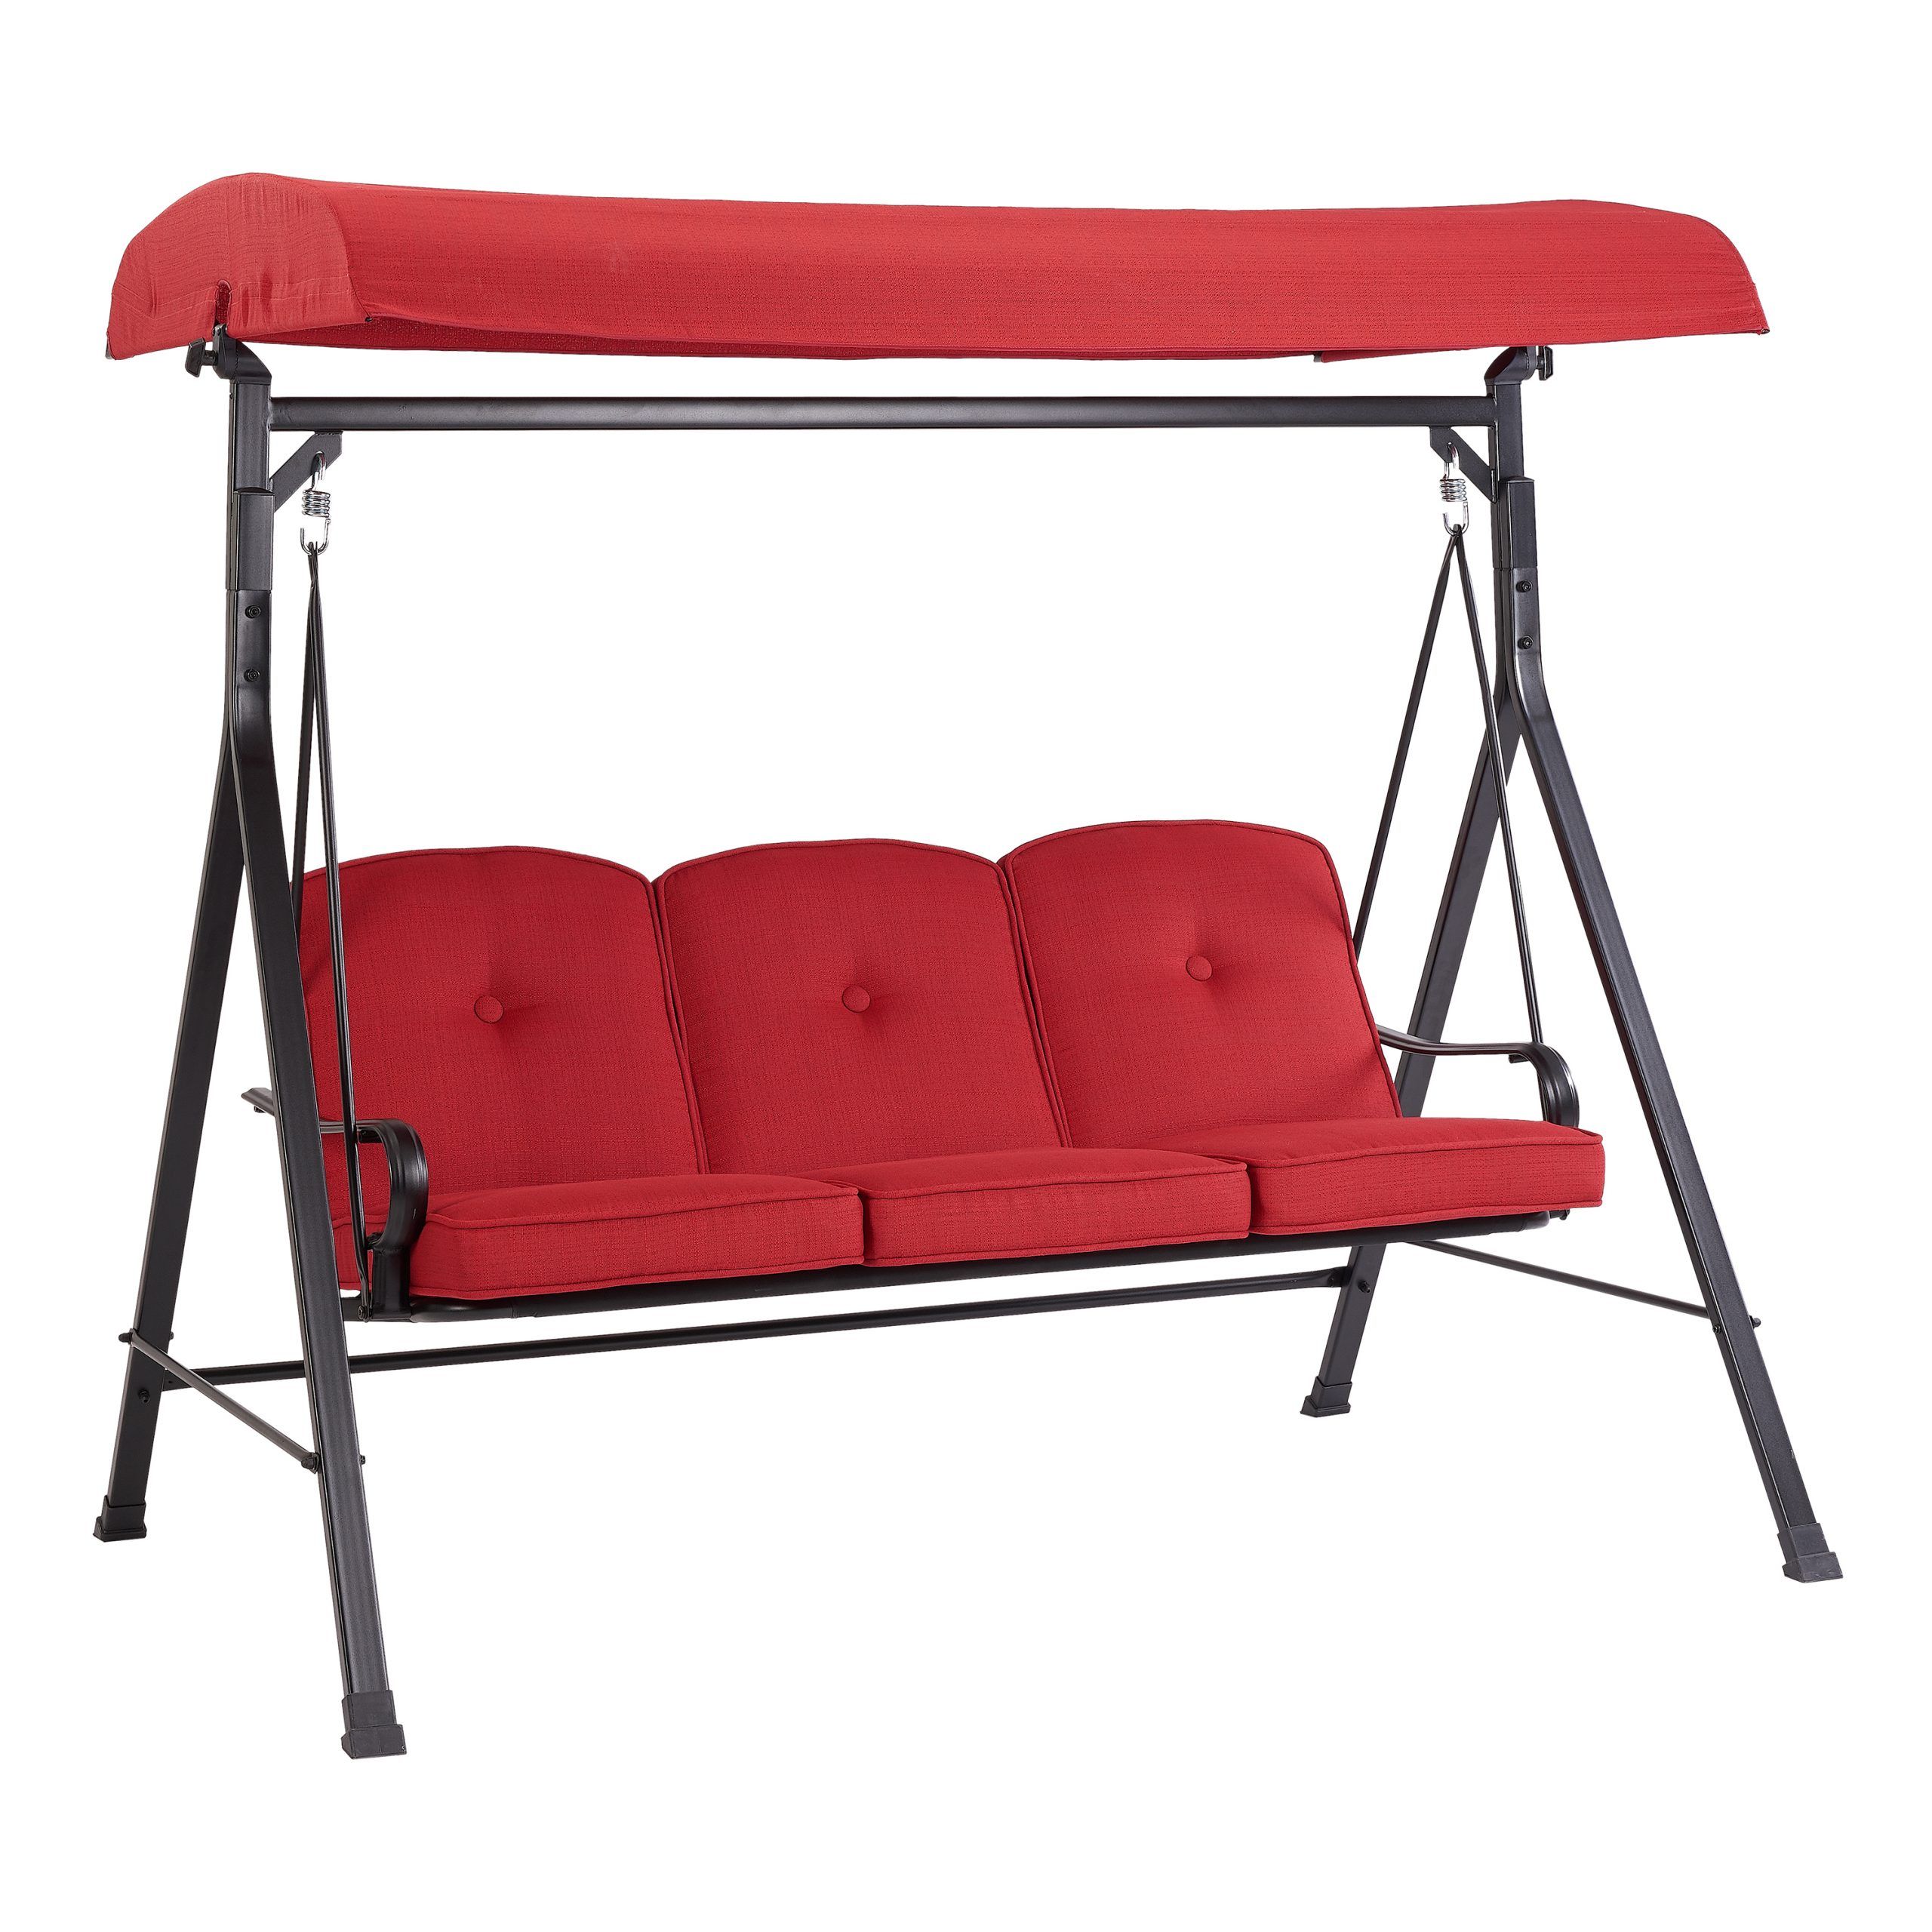 Mainstays Carson Creek Outdoor 3 Seat Porch Swing With Canopy, Red –  Walmart With Trendy Porch Swings With Canopy (View 19 of 30)